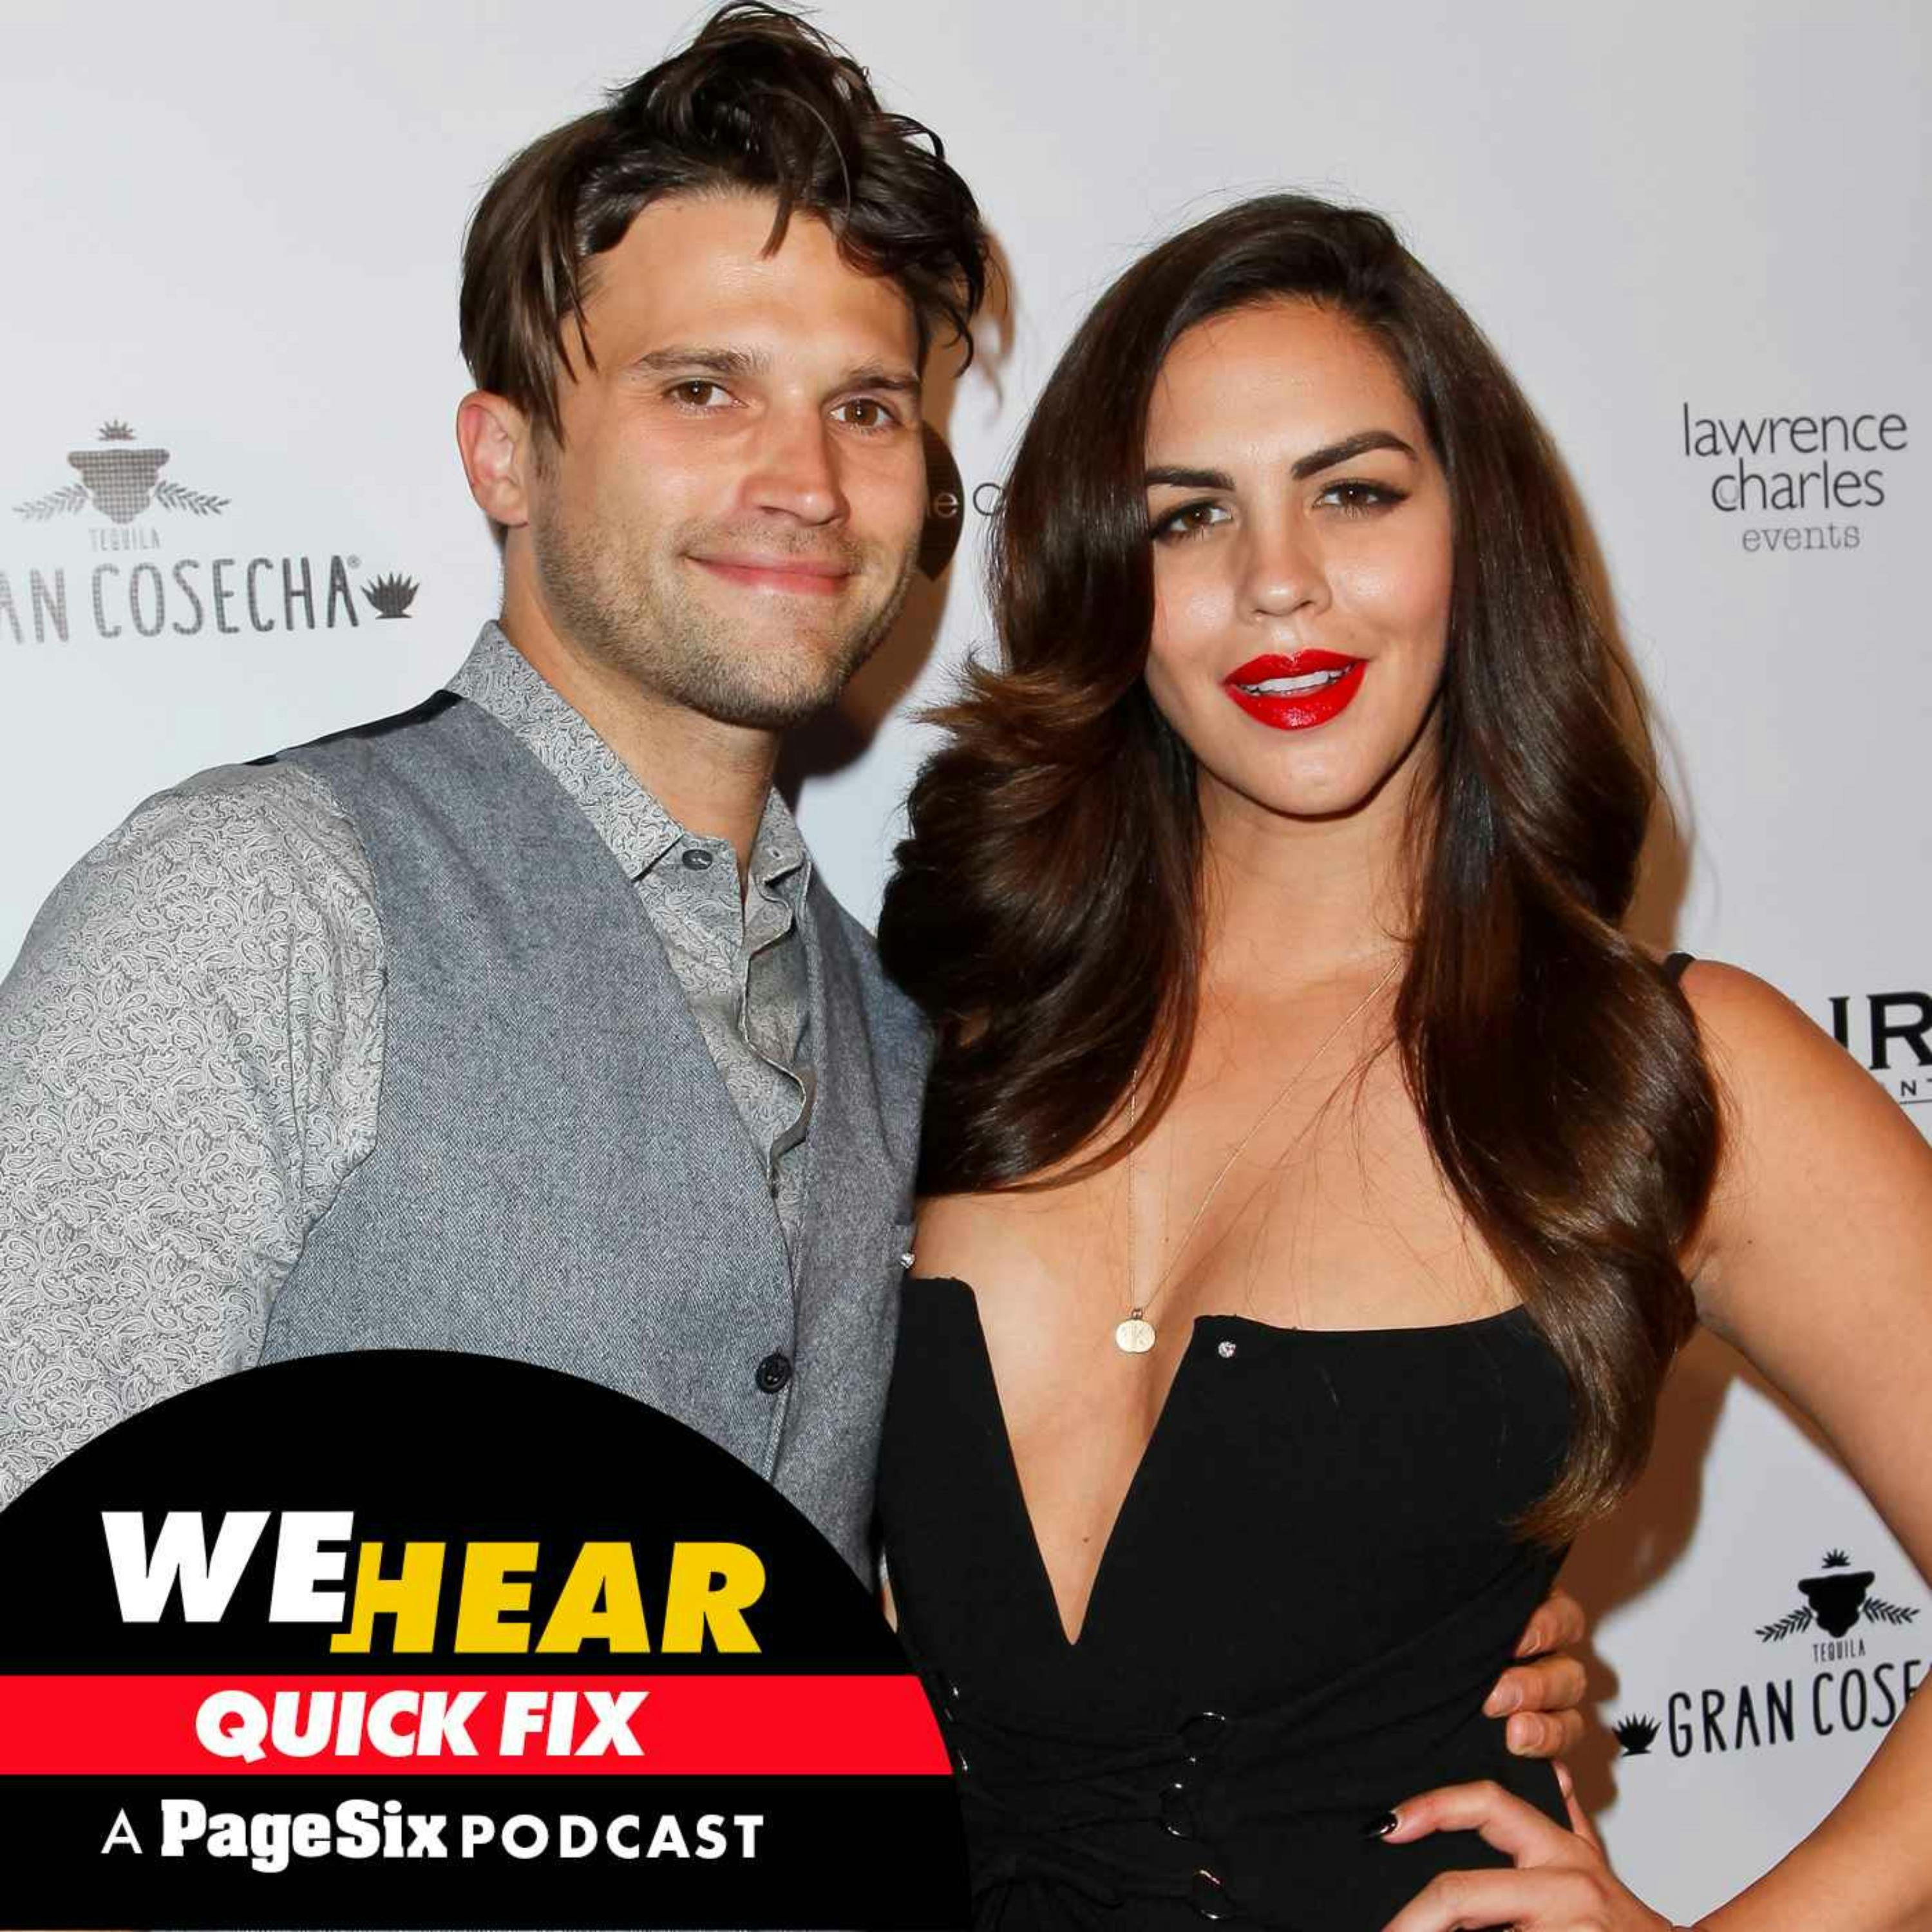 Tom Schwartz says he's to blame for failed marriage, more